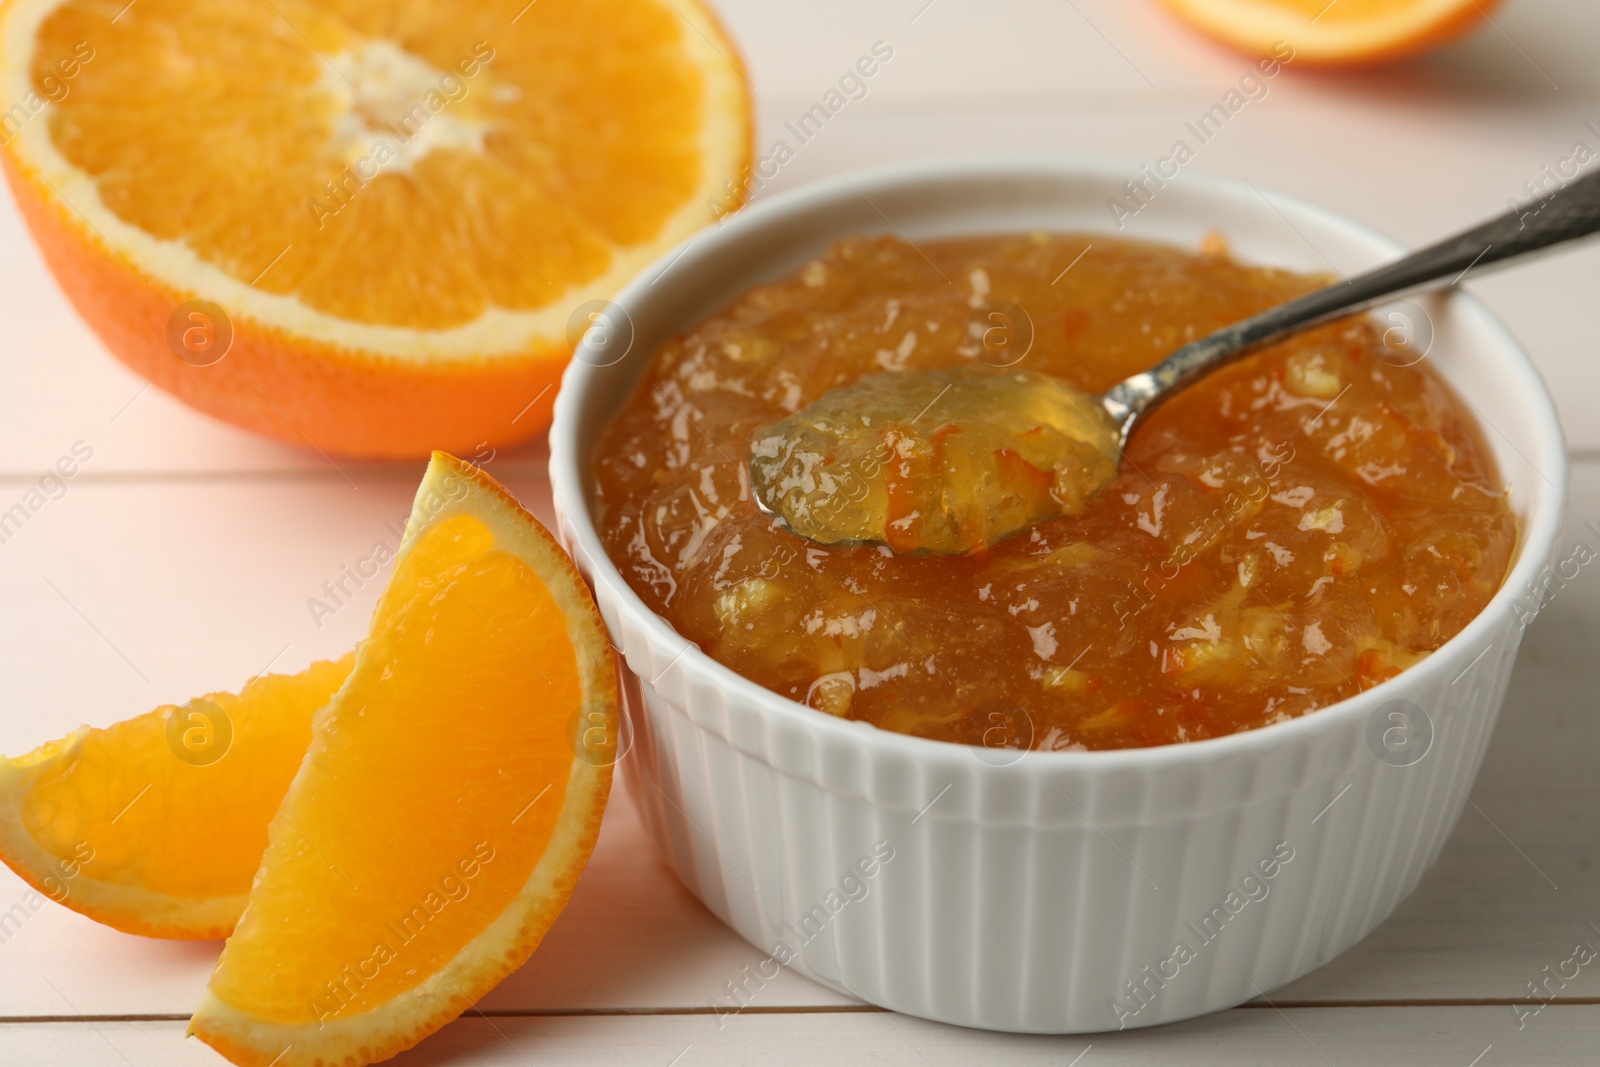 Photo of Delicious orange marmalade in bowl with spoon on white wooden table, closeup